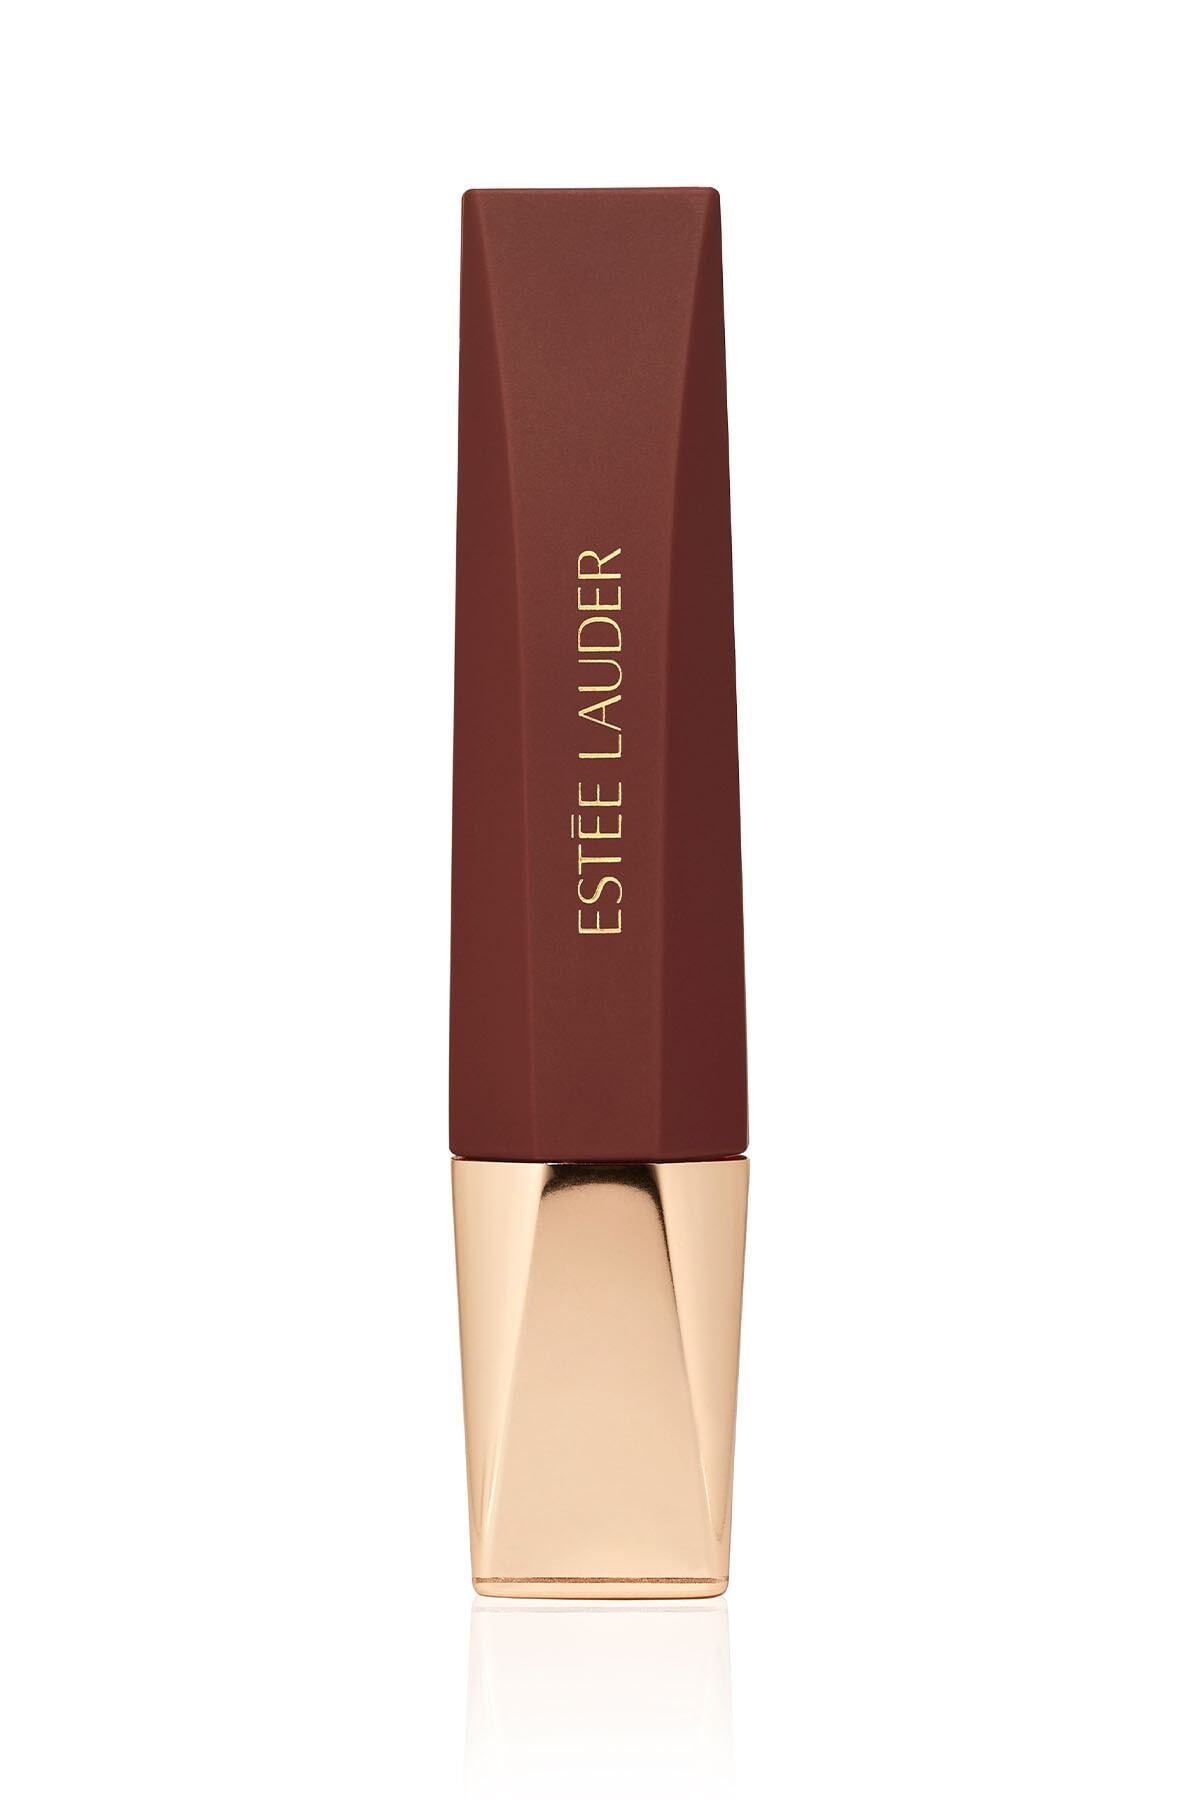 Estee Lauder Likit Mat Ruj - Pure Color Whipped Matte Lip Color - Renk: Cocoa Whip, 9ml